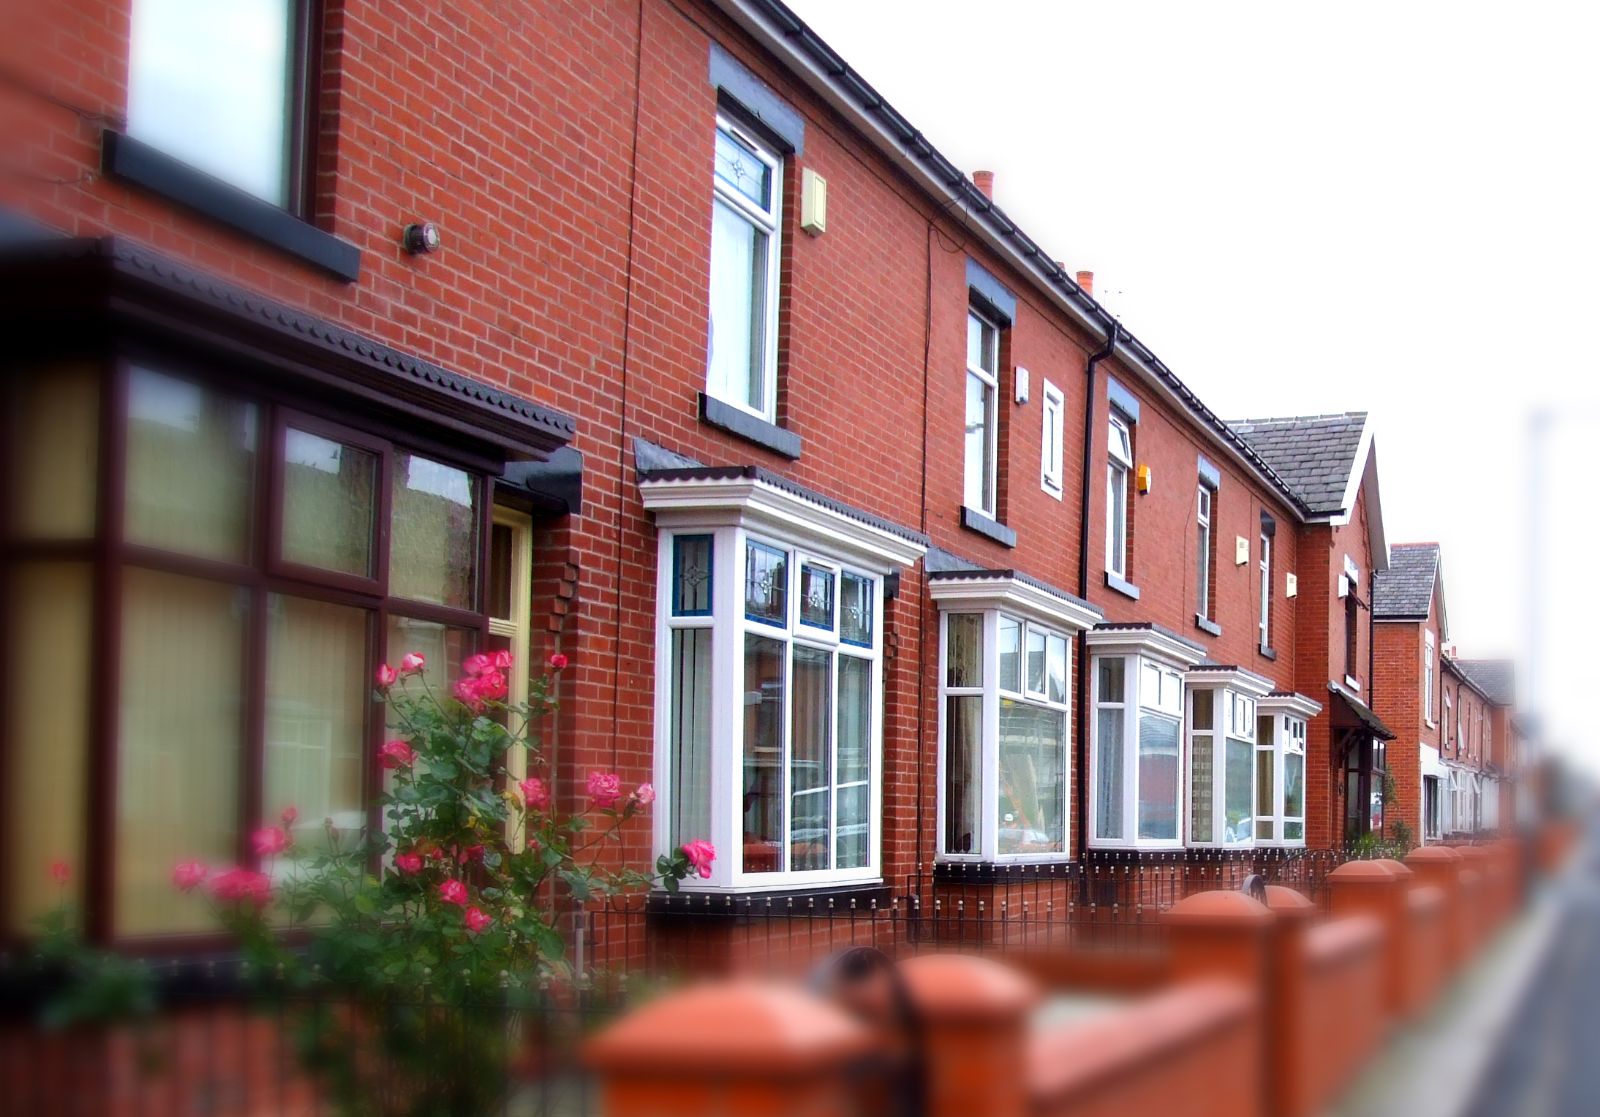 Template Press Release on council homes sold under Right to Buy